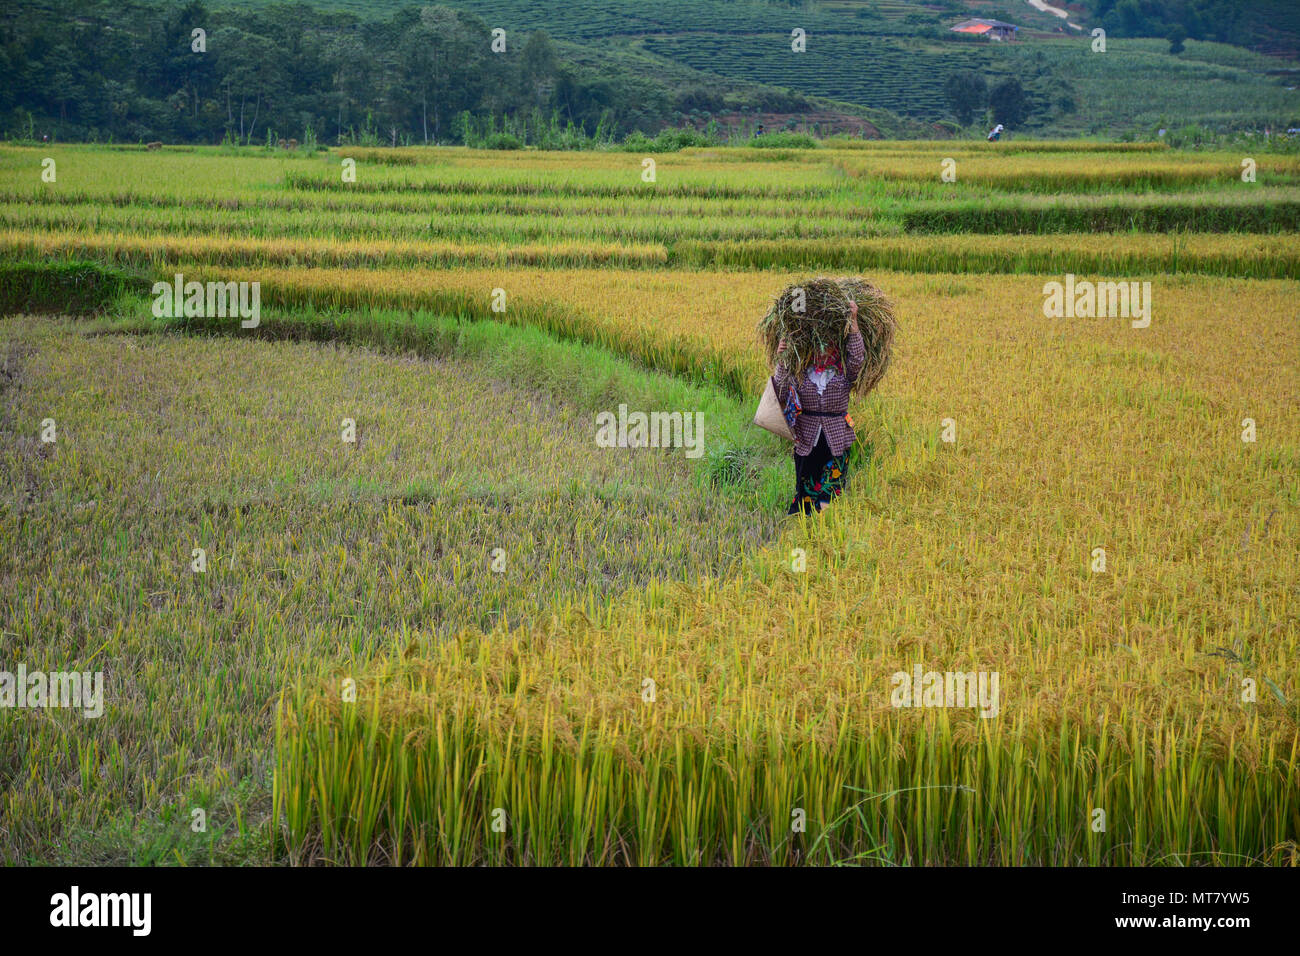 Hmong people havesting rice on the field at summer in Northern Vietnam. Stock Photo